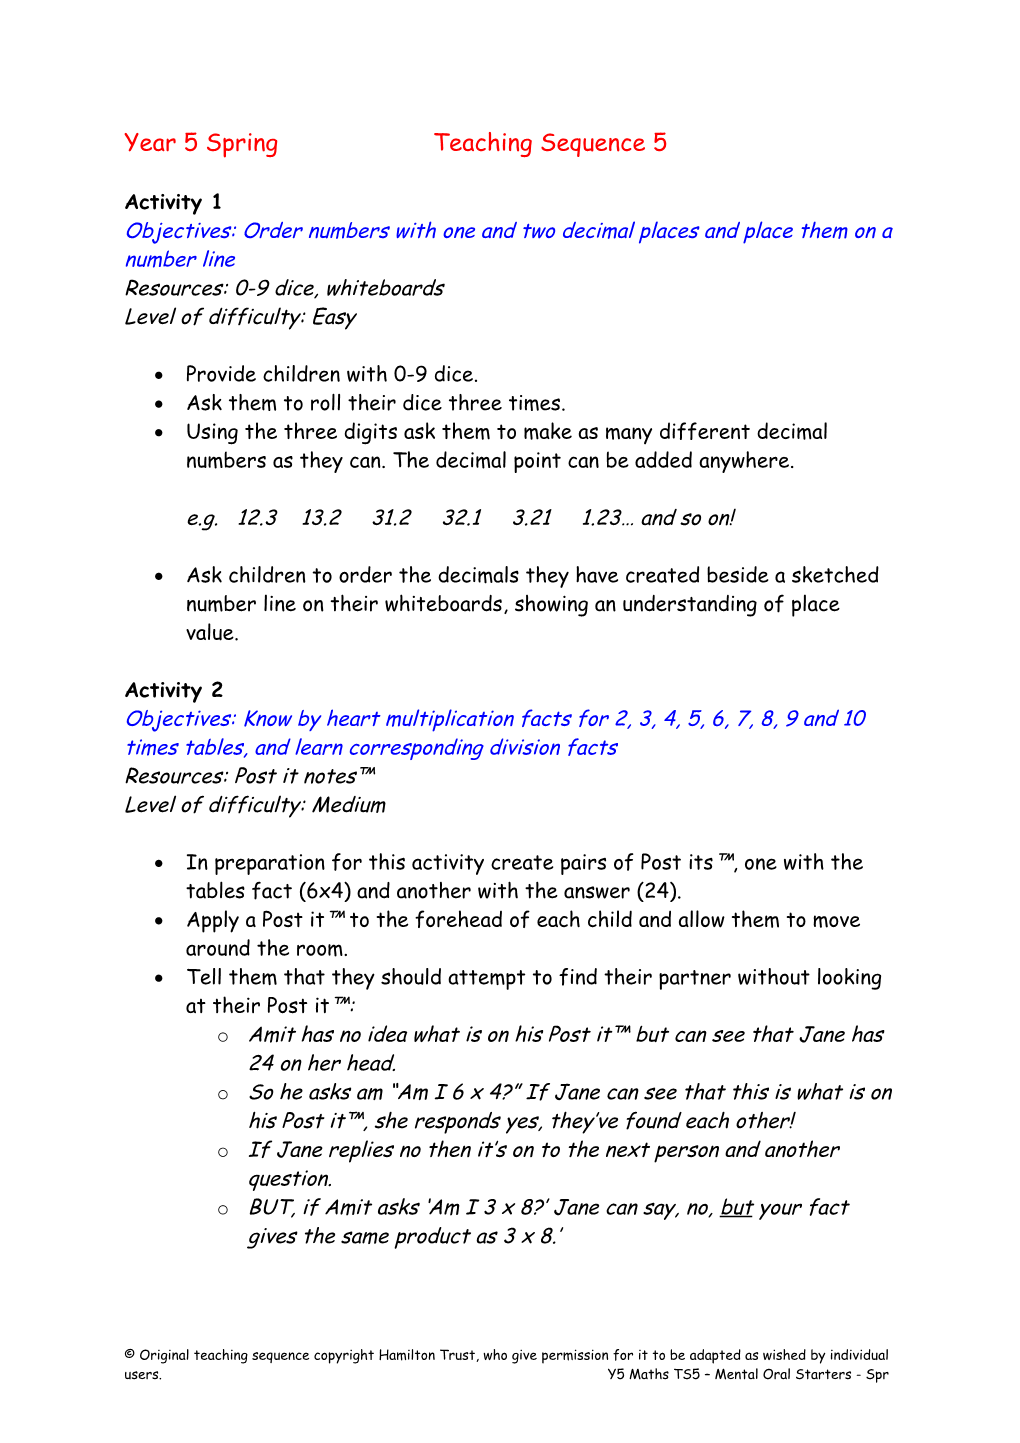 Year 5 Spring Teaching Sequence 5